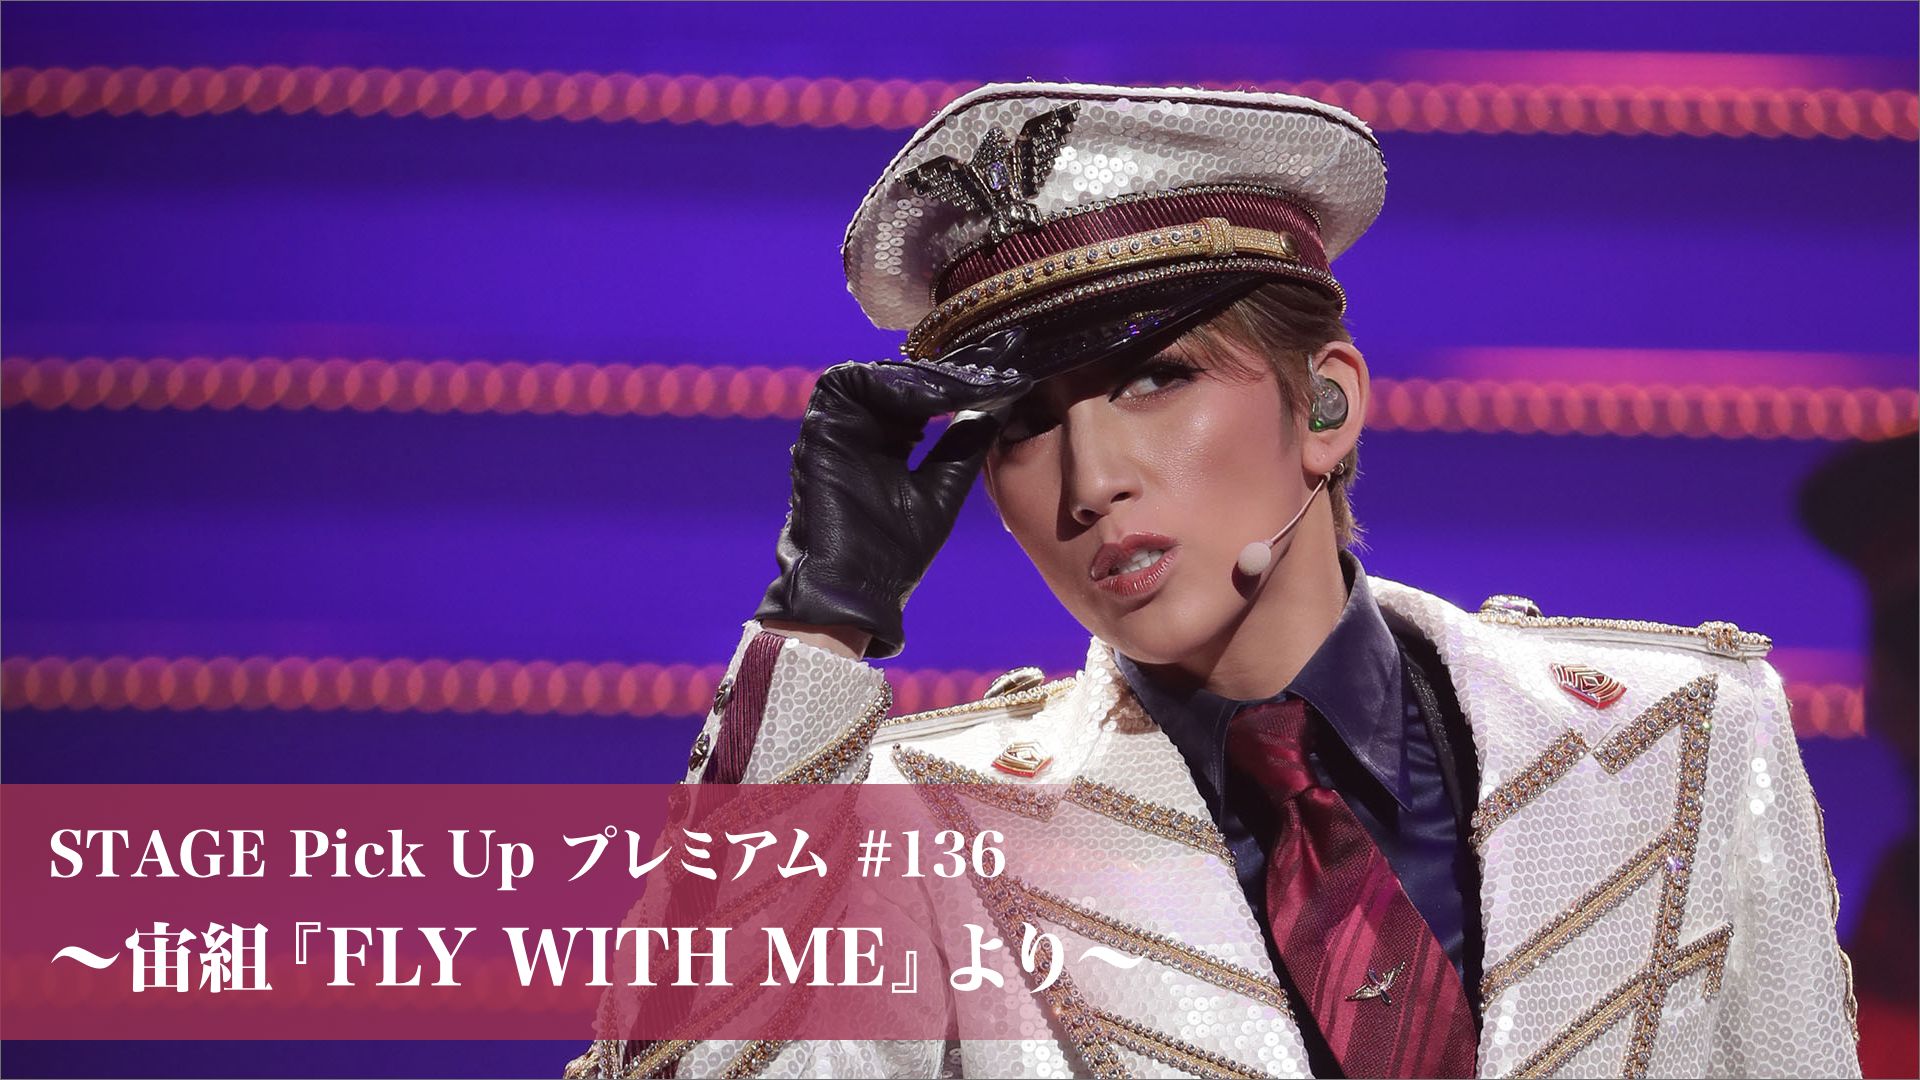 STAGE Pick Up プレミアム #136〜宙組『FLY WITH ME』より〜